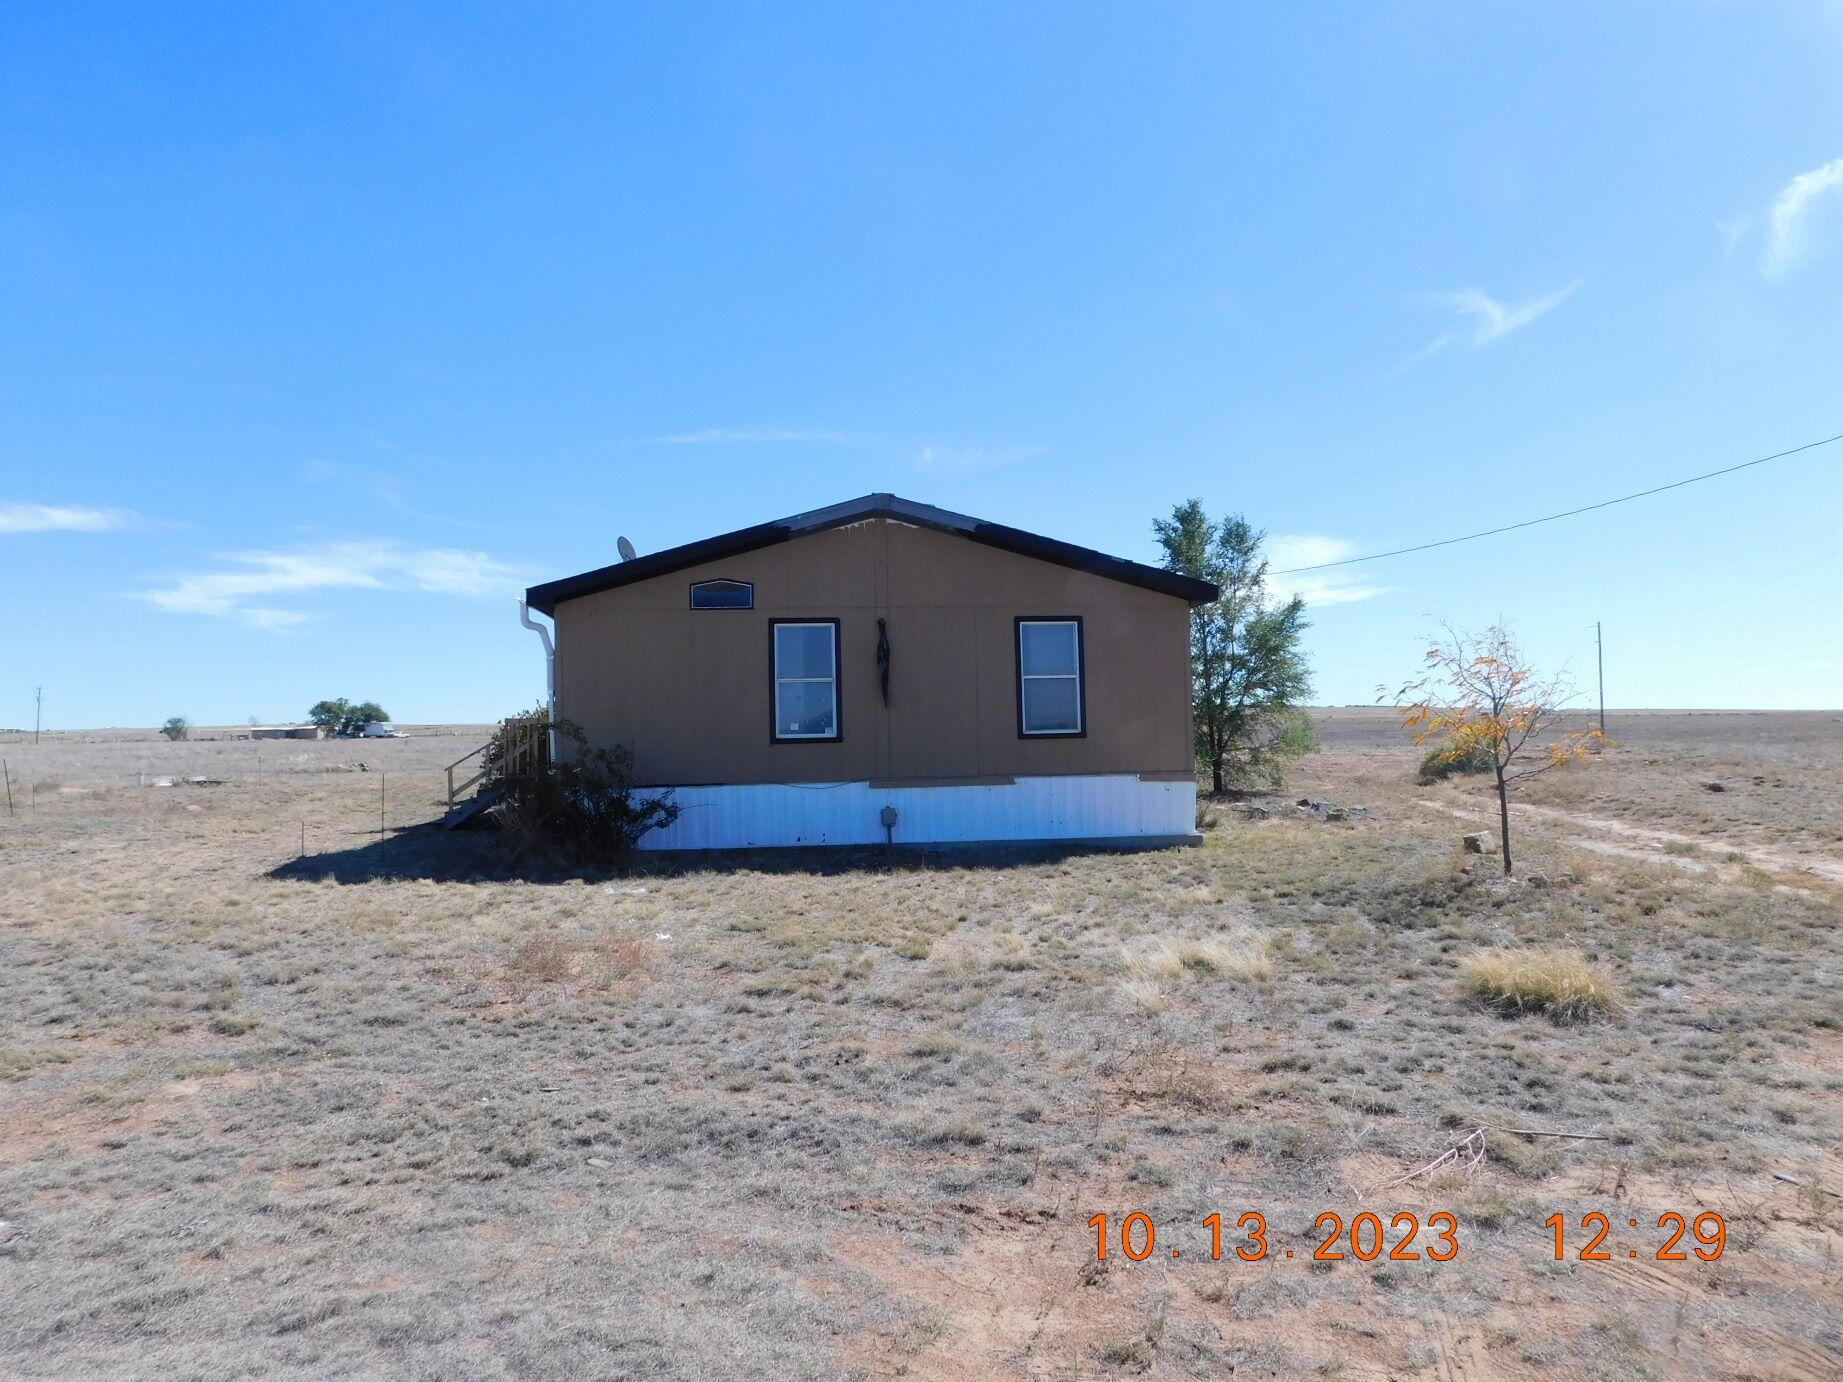 11 Palomino Drive, Moriarty, New Mexico 87035, 4 Bedrooms Bedrooms, ,2 BathroomsBathrooms,Residential,For Sale,11 Palomino Drive,1043299